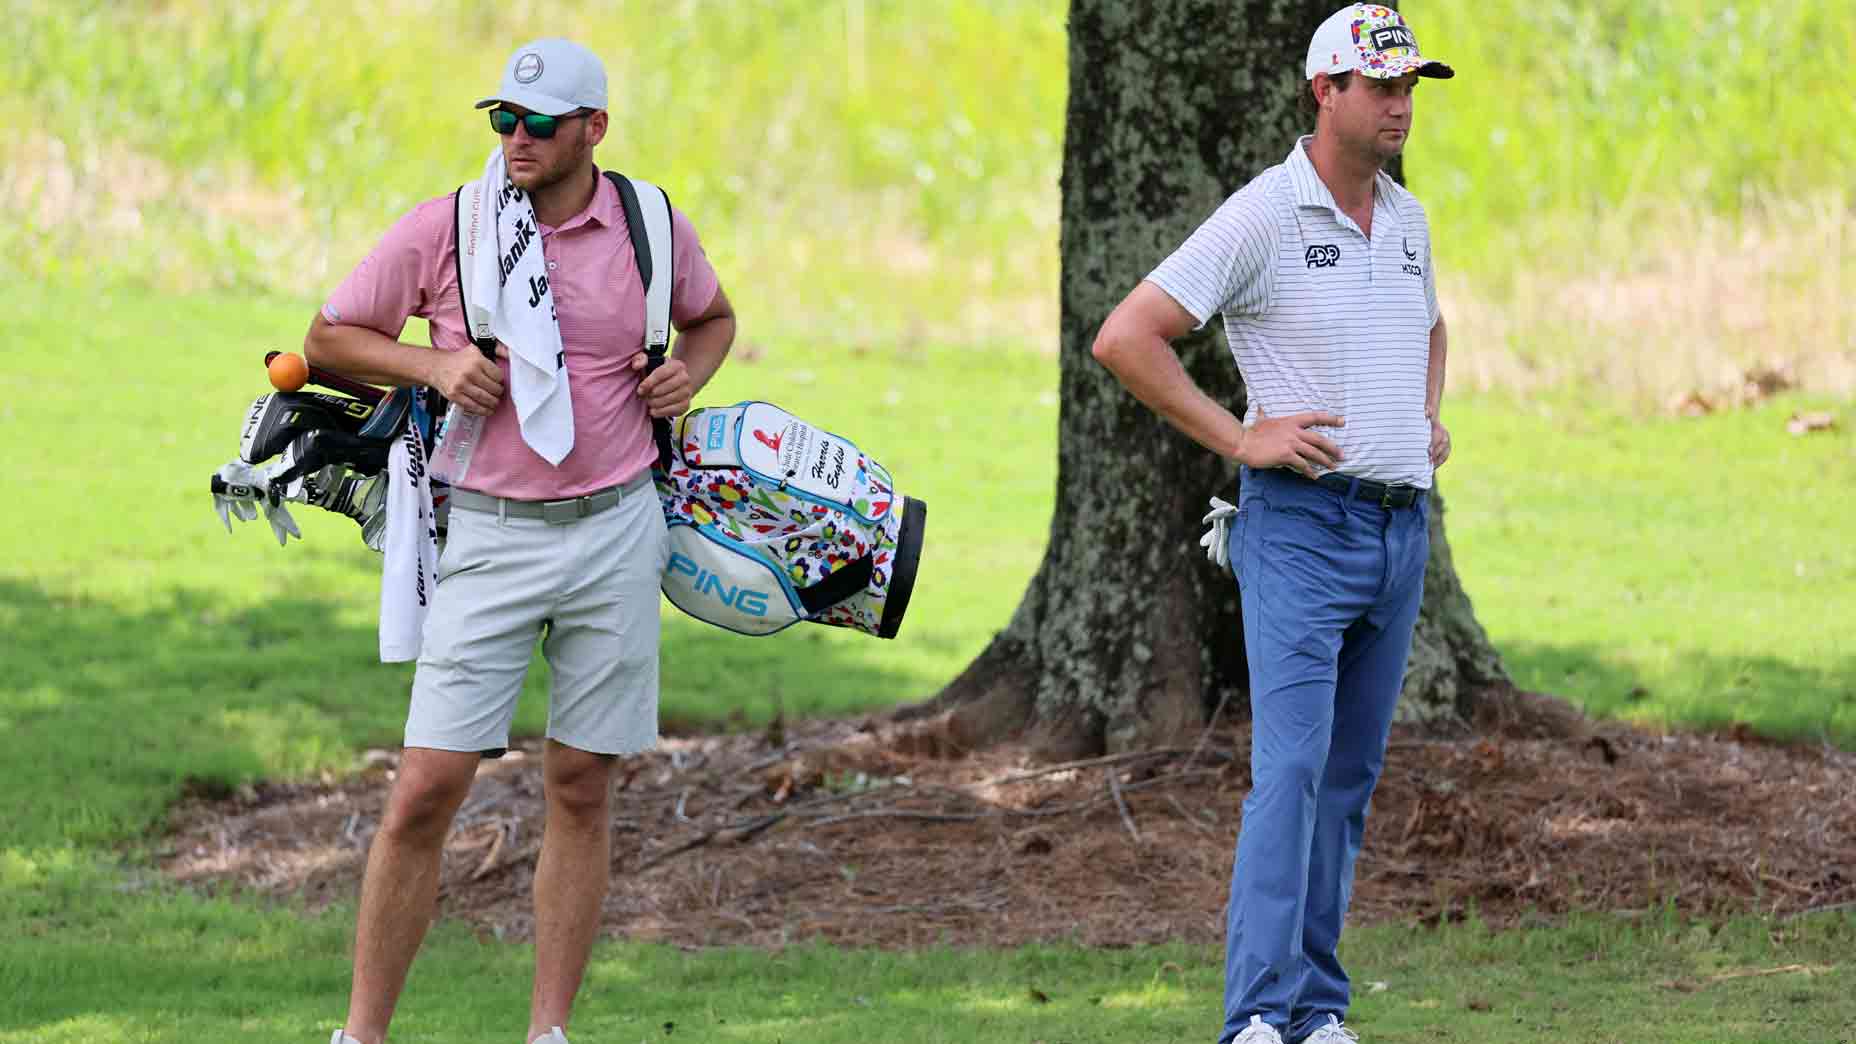 How to Take a Caddie